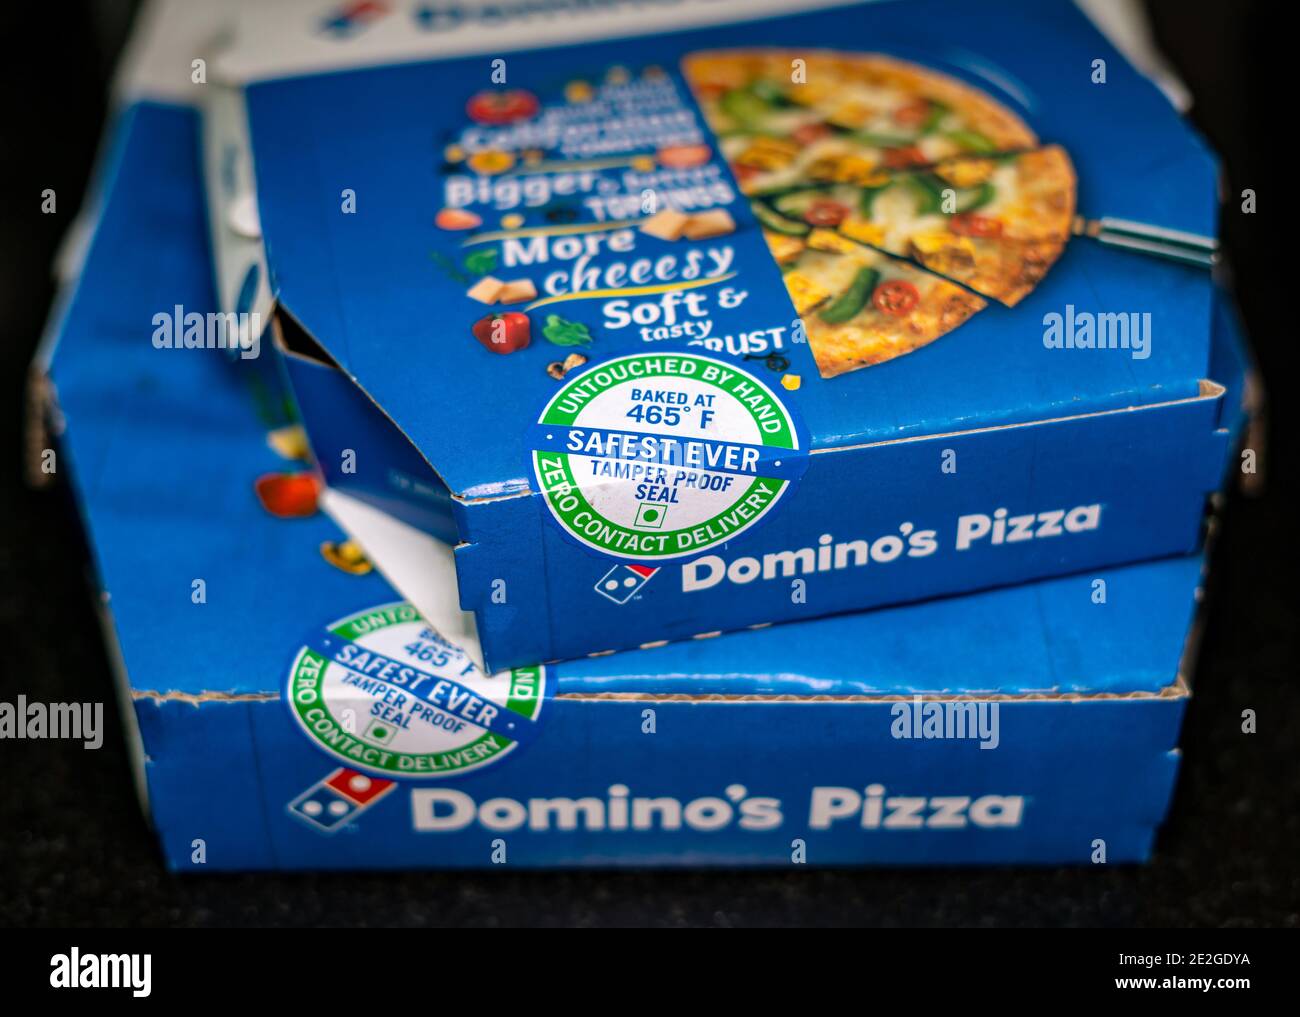 Stacked Domino's pizza boxes sealed with tamper proof seal for zero contact delivery. Stock Photo